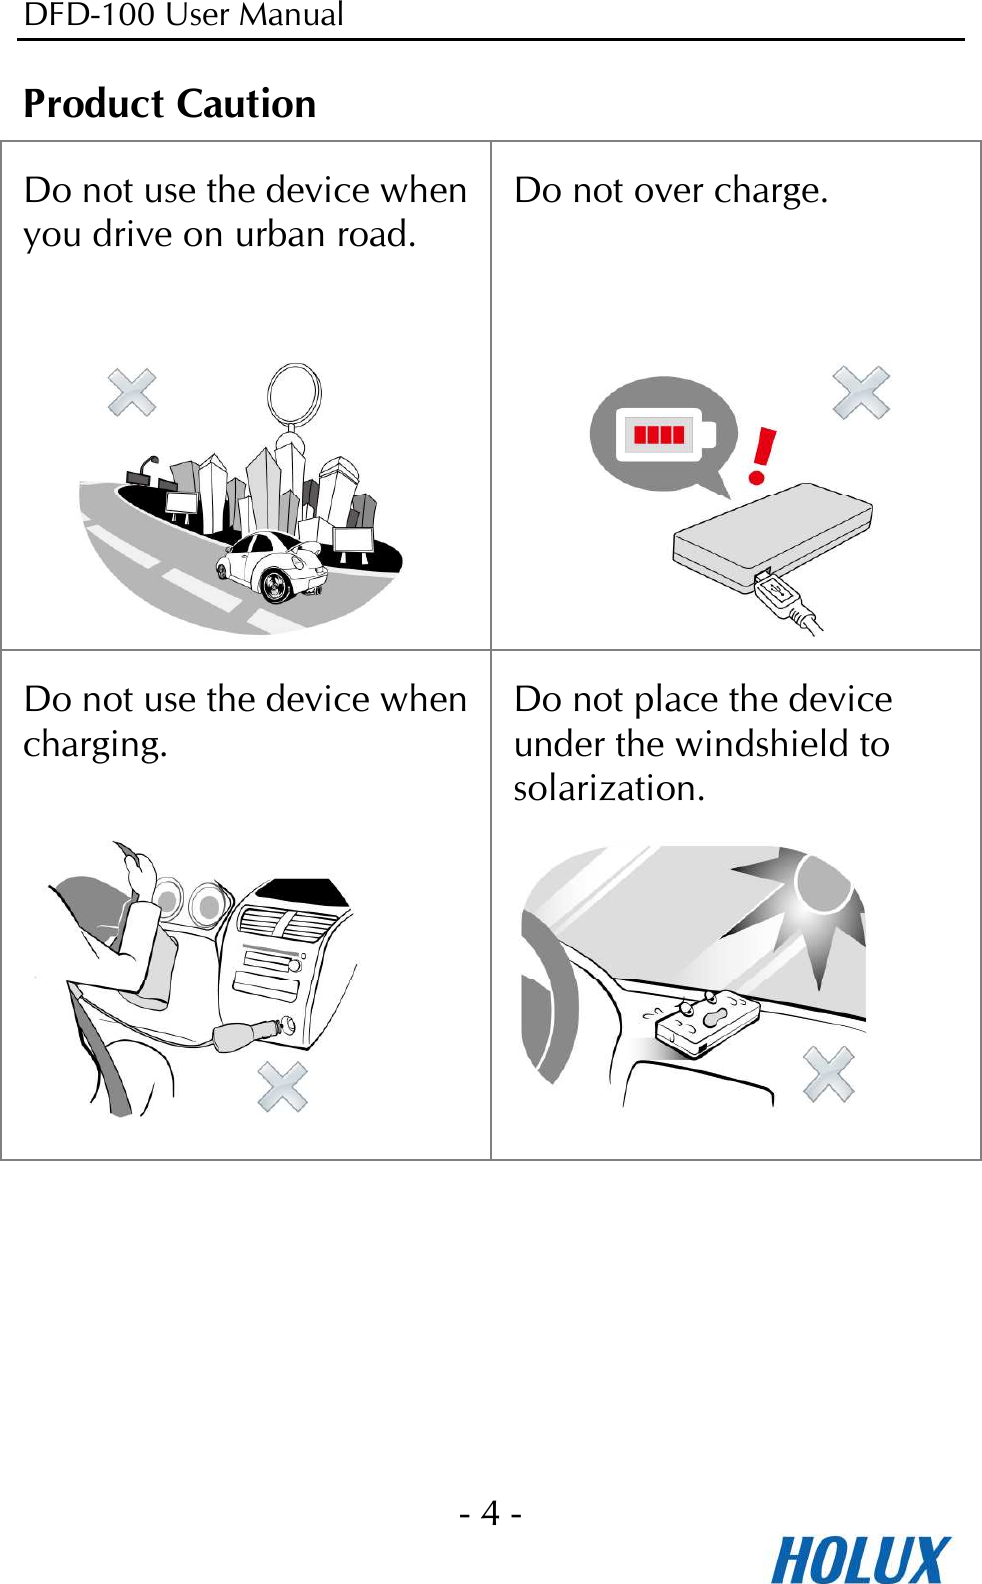 DFD-100 User Manual - 4 -  Product Caution Do not use the device when you drive on urban road.   Do not over charge.    Do not use the device when charging.   Do not place the device under the windshield to solarization.   